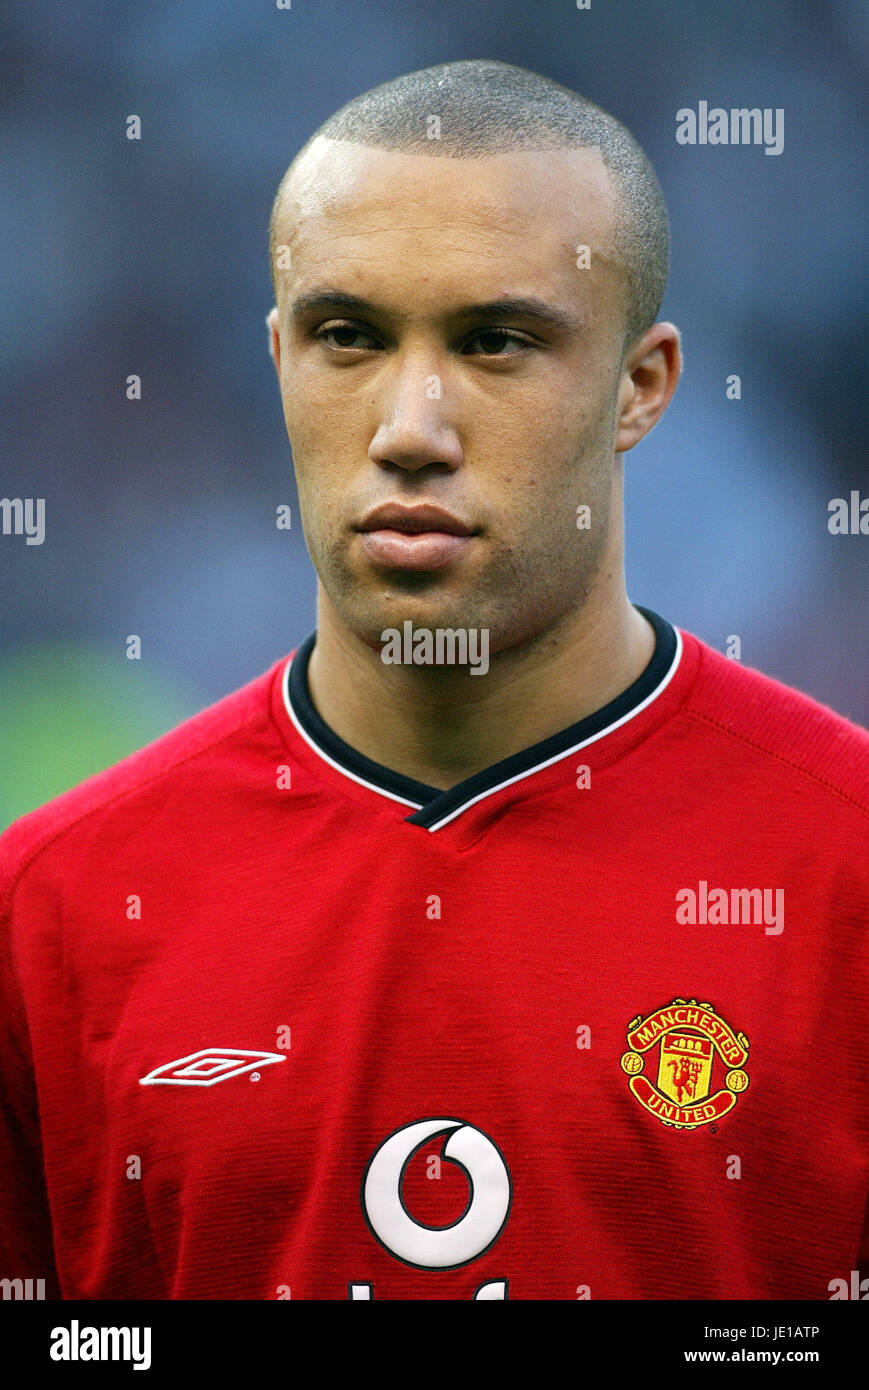 MIKAEL SILVESTRE MANCHESTER UNITED FC OLD TRAFFORD MANCHESTER 24 April 2002 Stock Photo